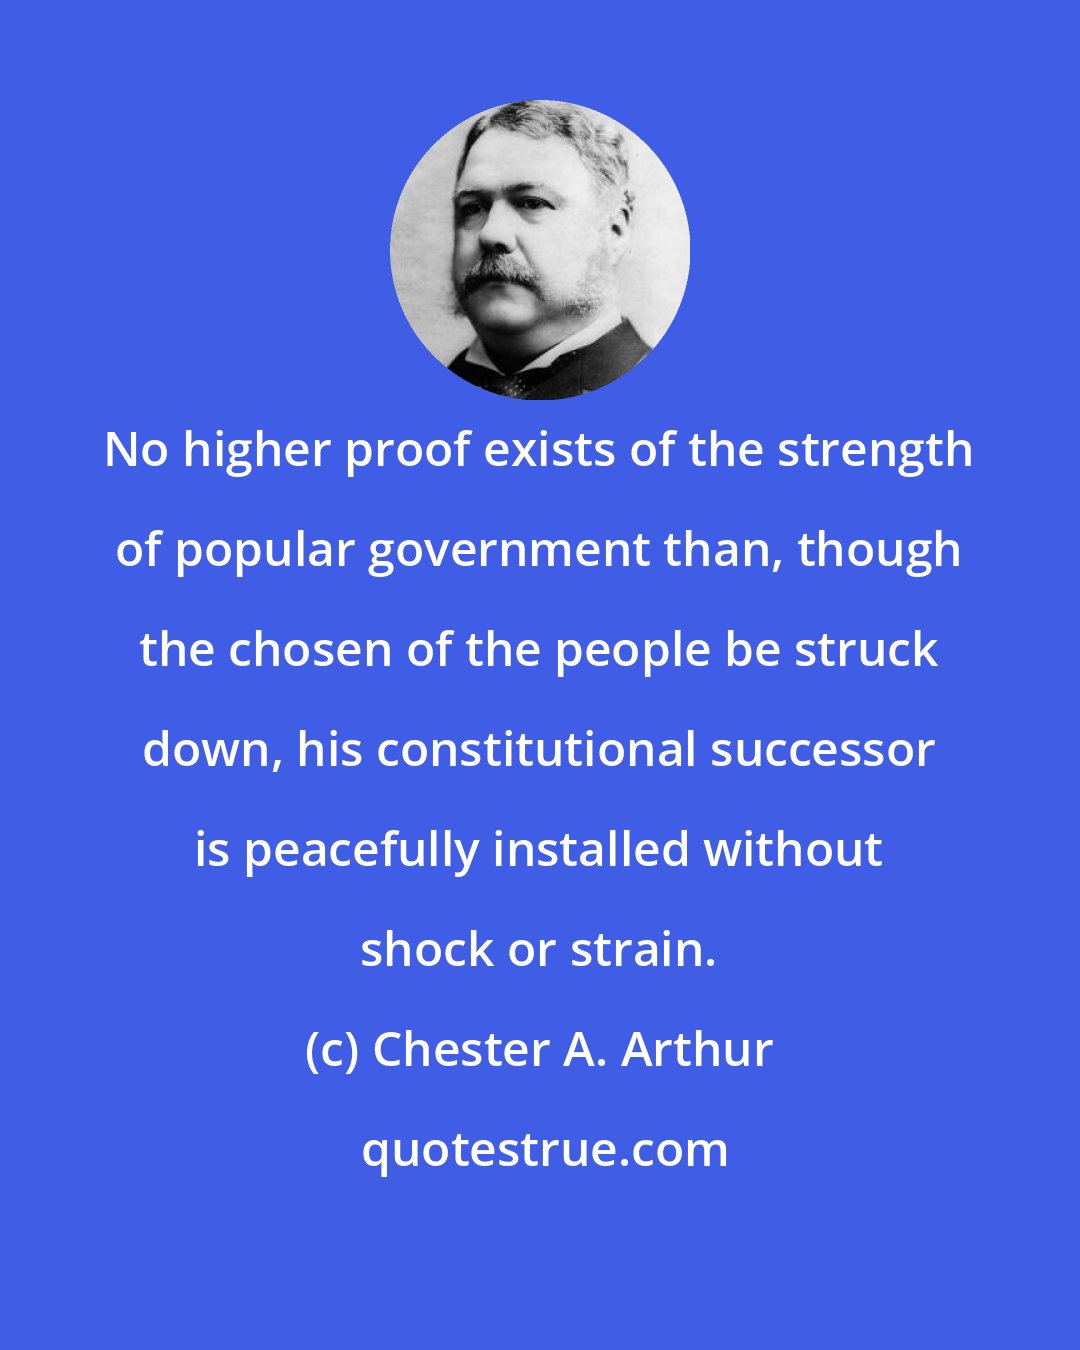 Chester A. Arthur: No higher proof exists of the strength of popular government than, though the chosen of the people be struck down, his constitutional successor is peacefully installed without shock or strain.